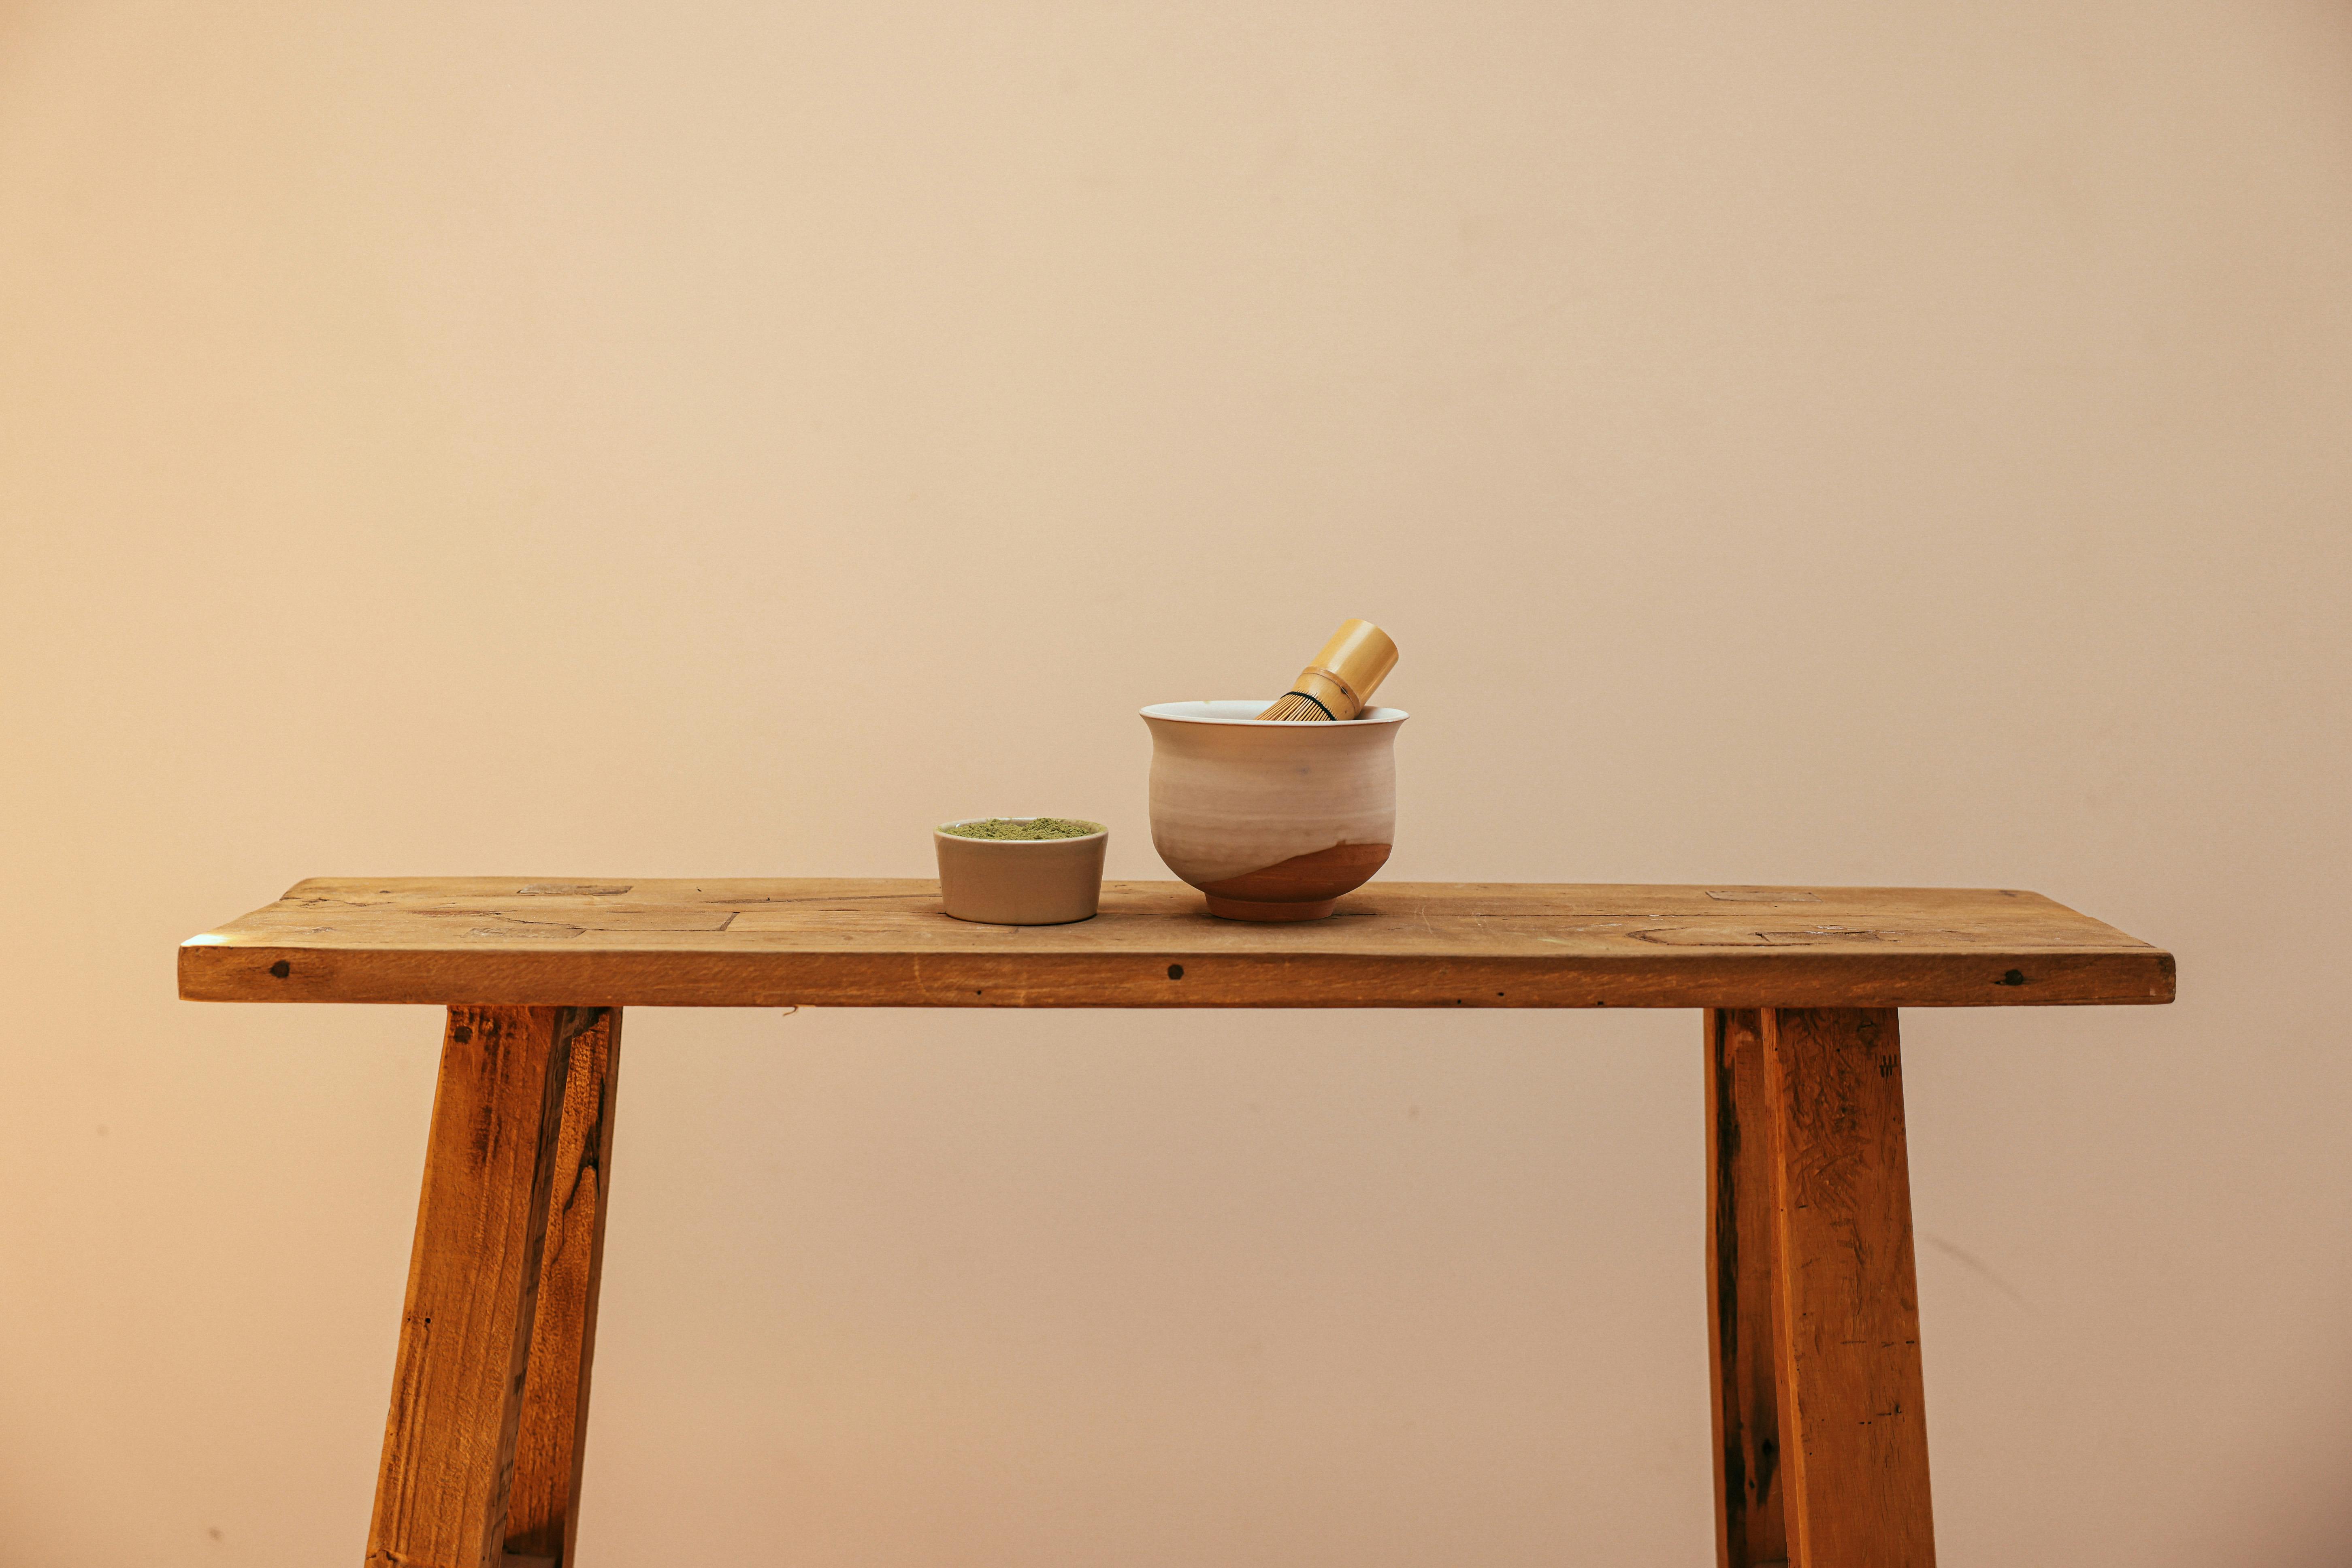 Ceramic bowl on a brown wooden bench | Source: Pexels